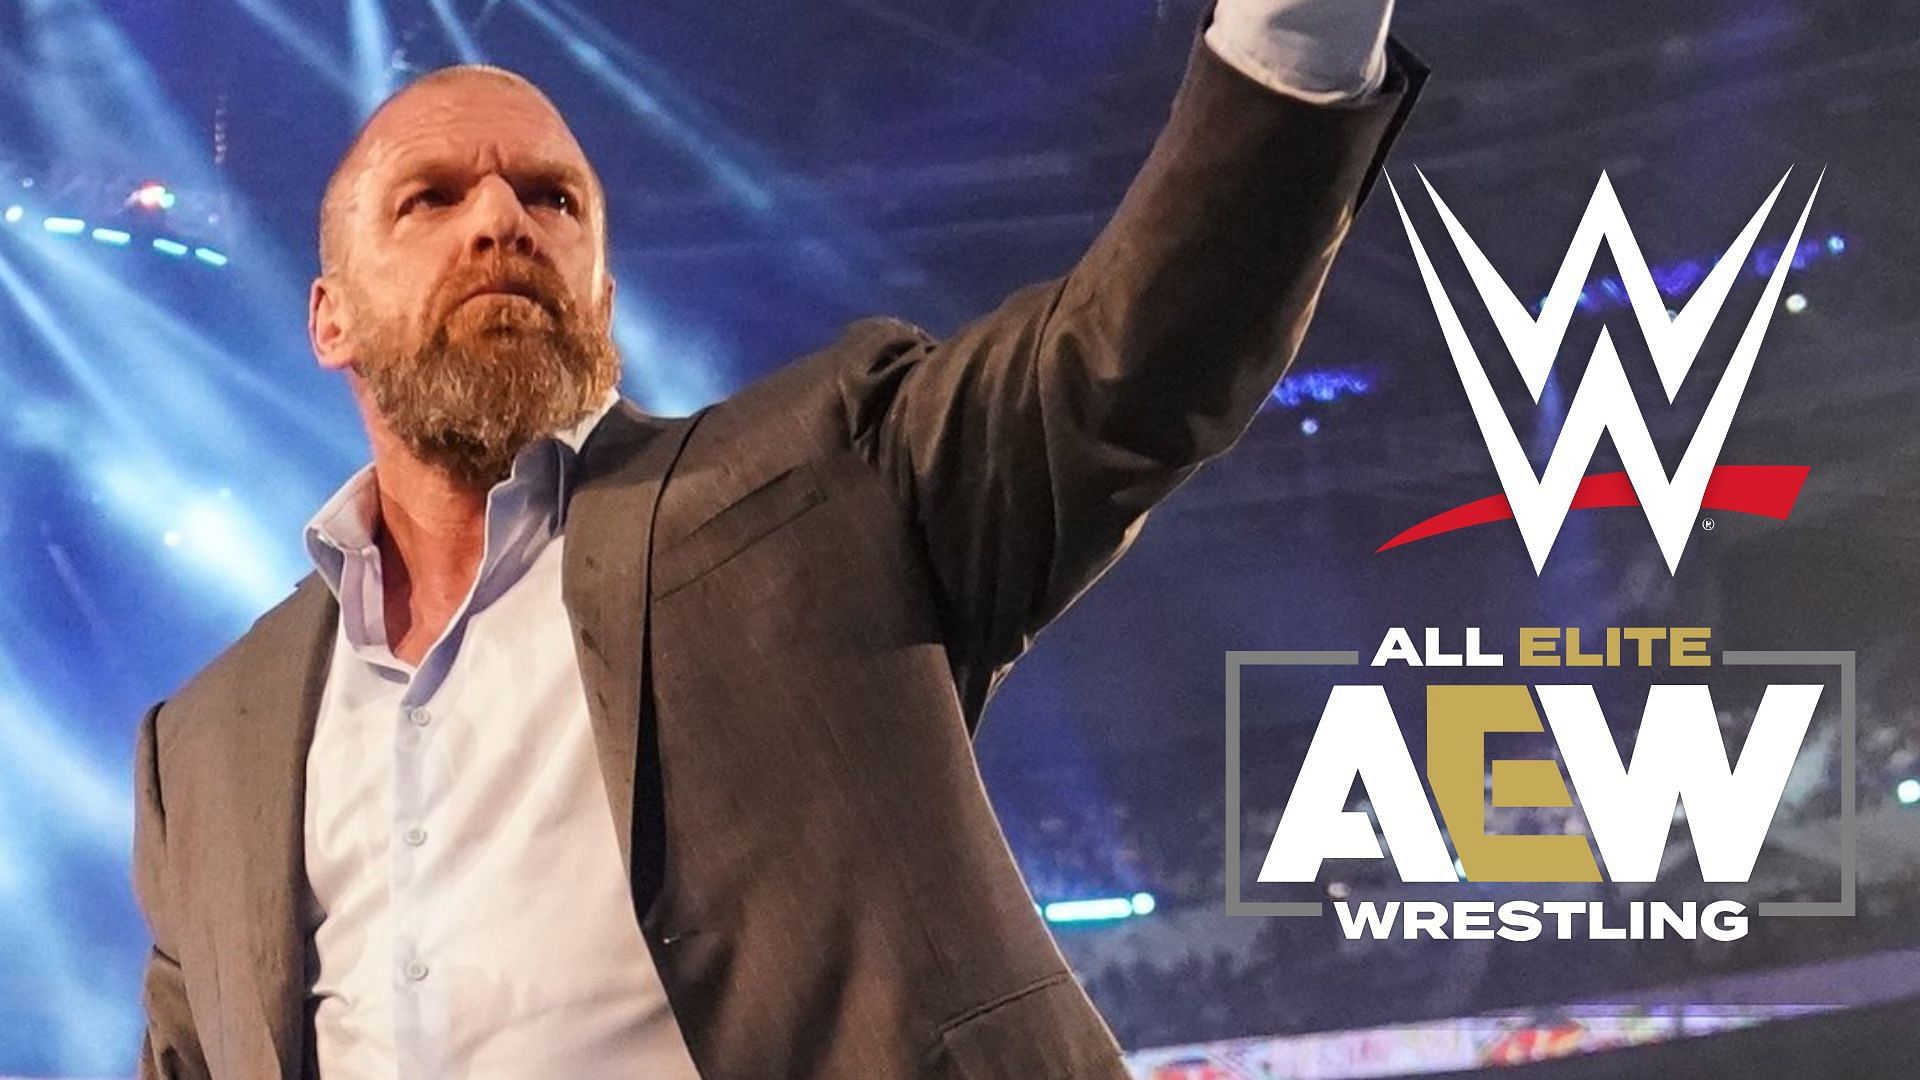 A recently signed WWE Superstar chose Triple H to Tony Khan and AEW